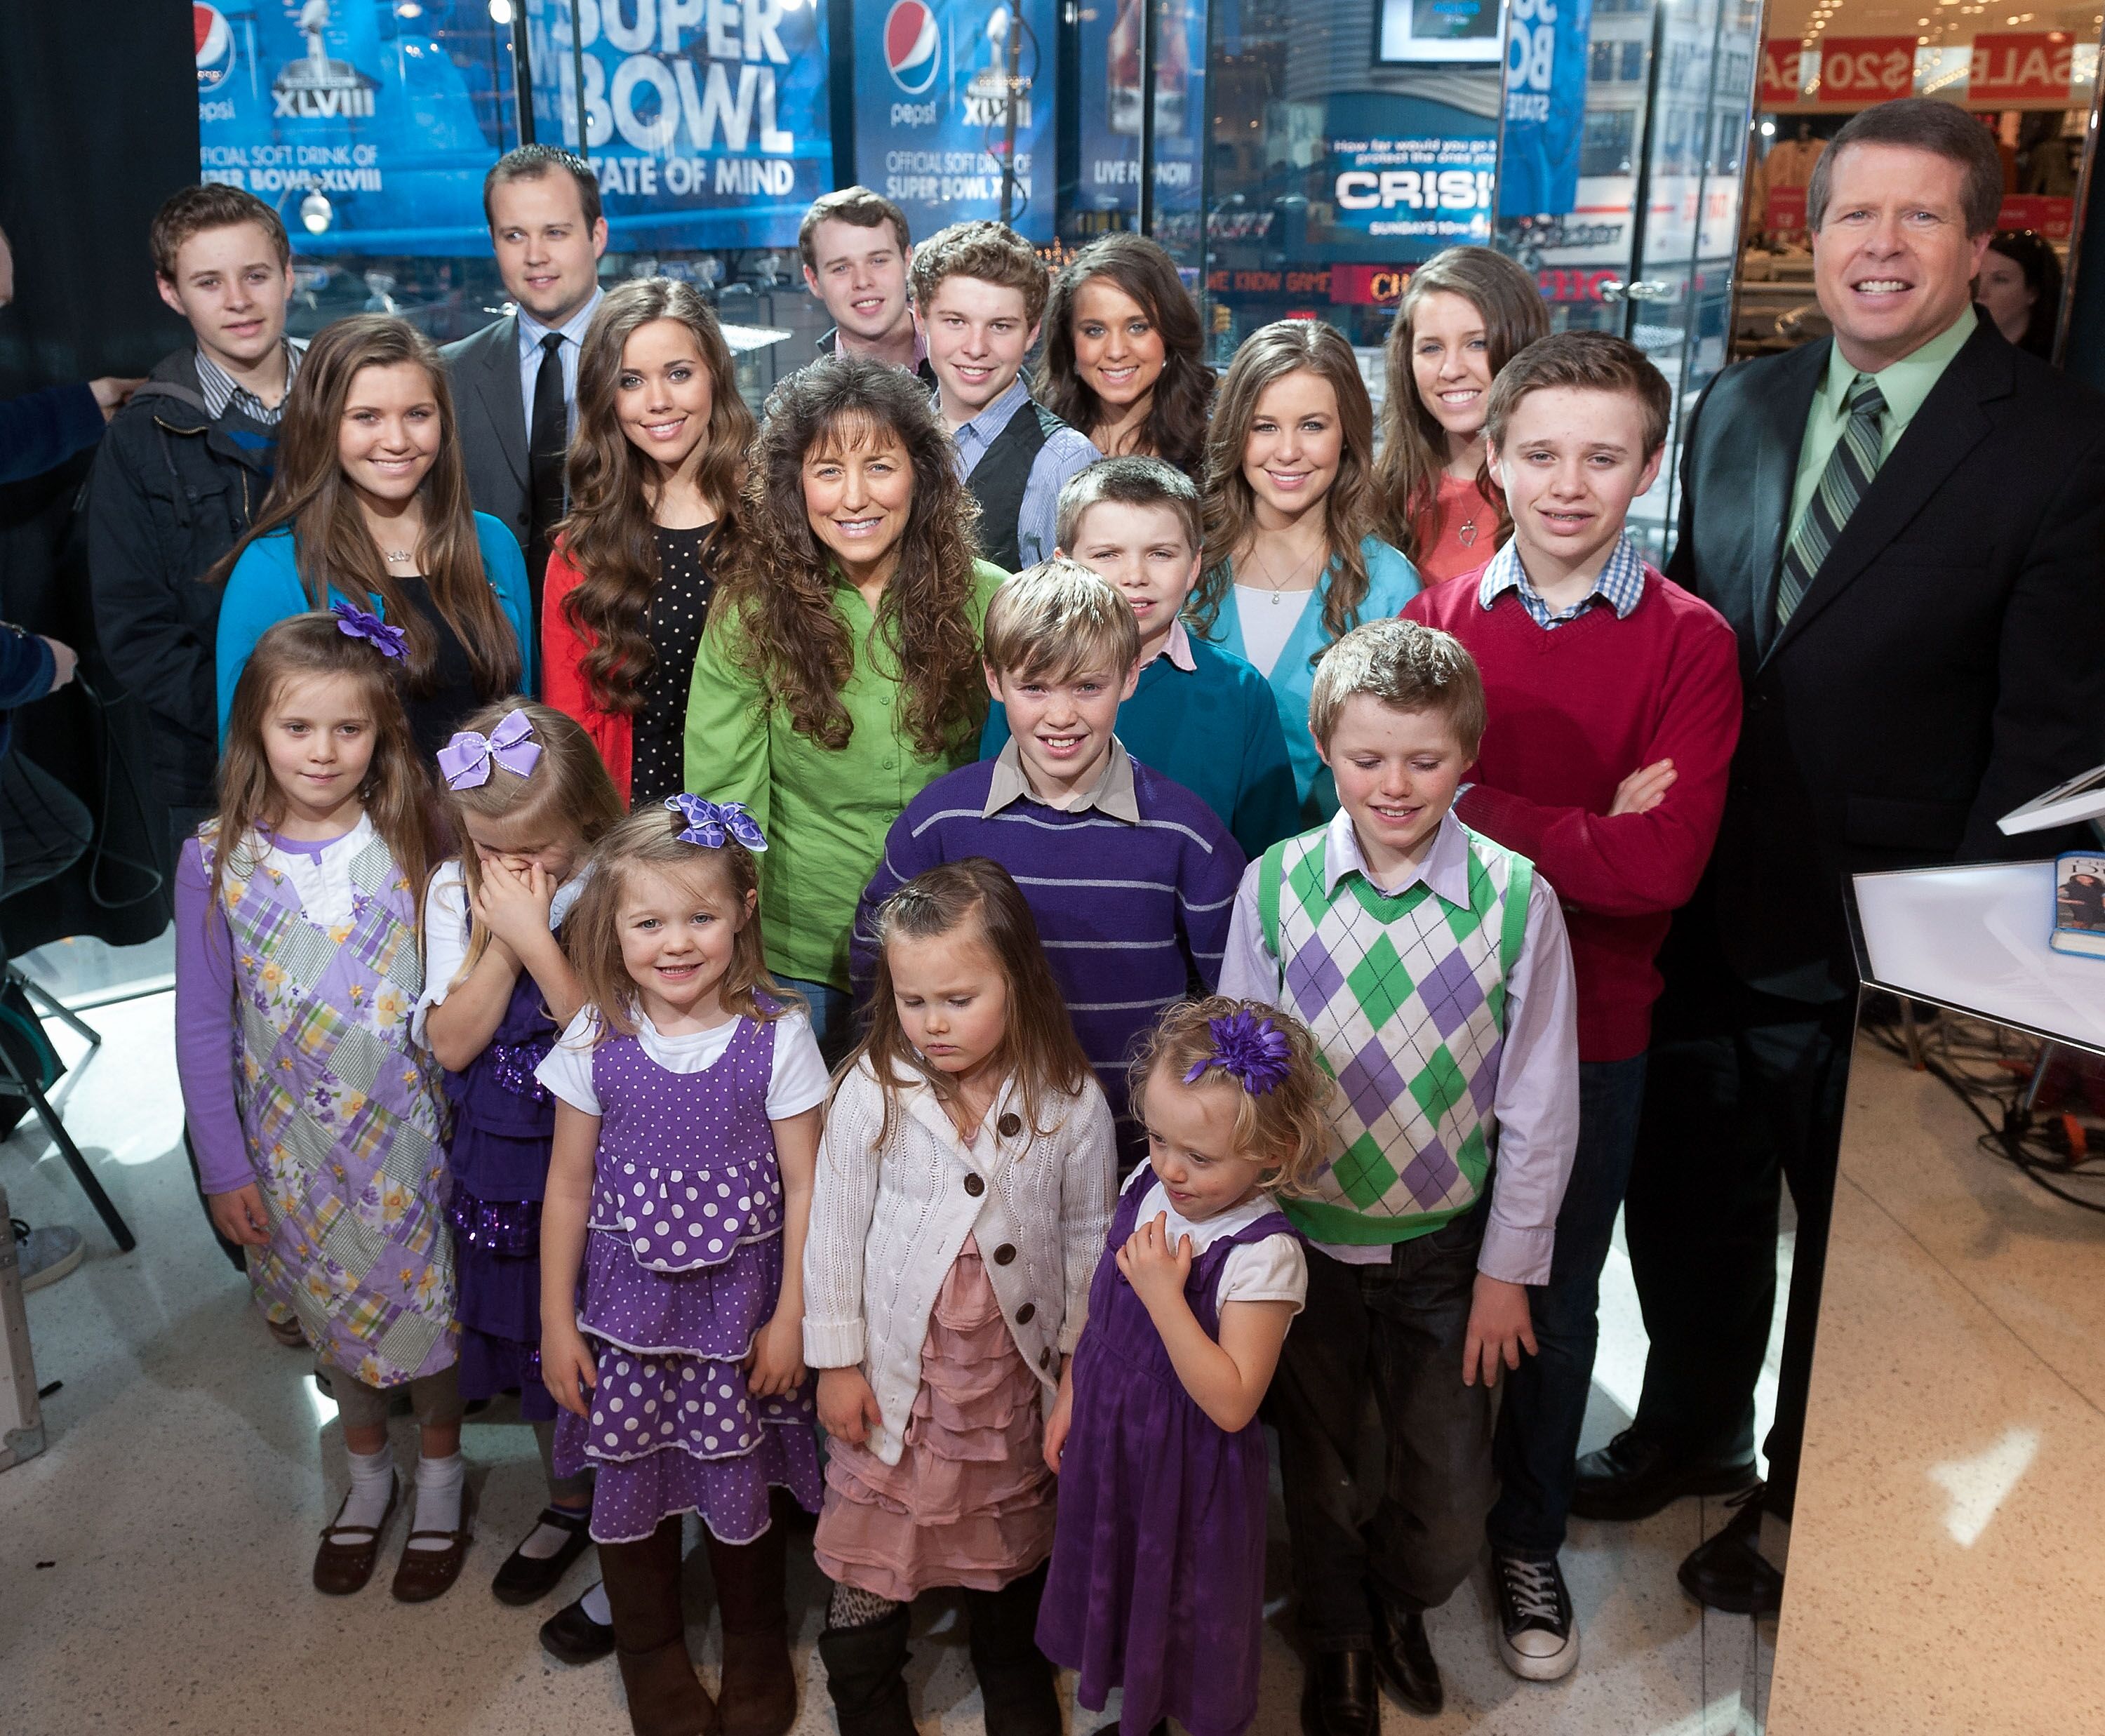 The Duggar family visits "Extra" at their New York studios at H&M in Times Square | Photo: Getty Images